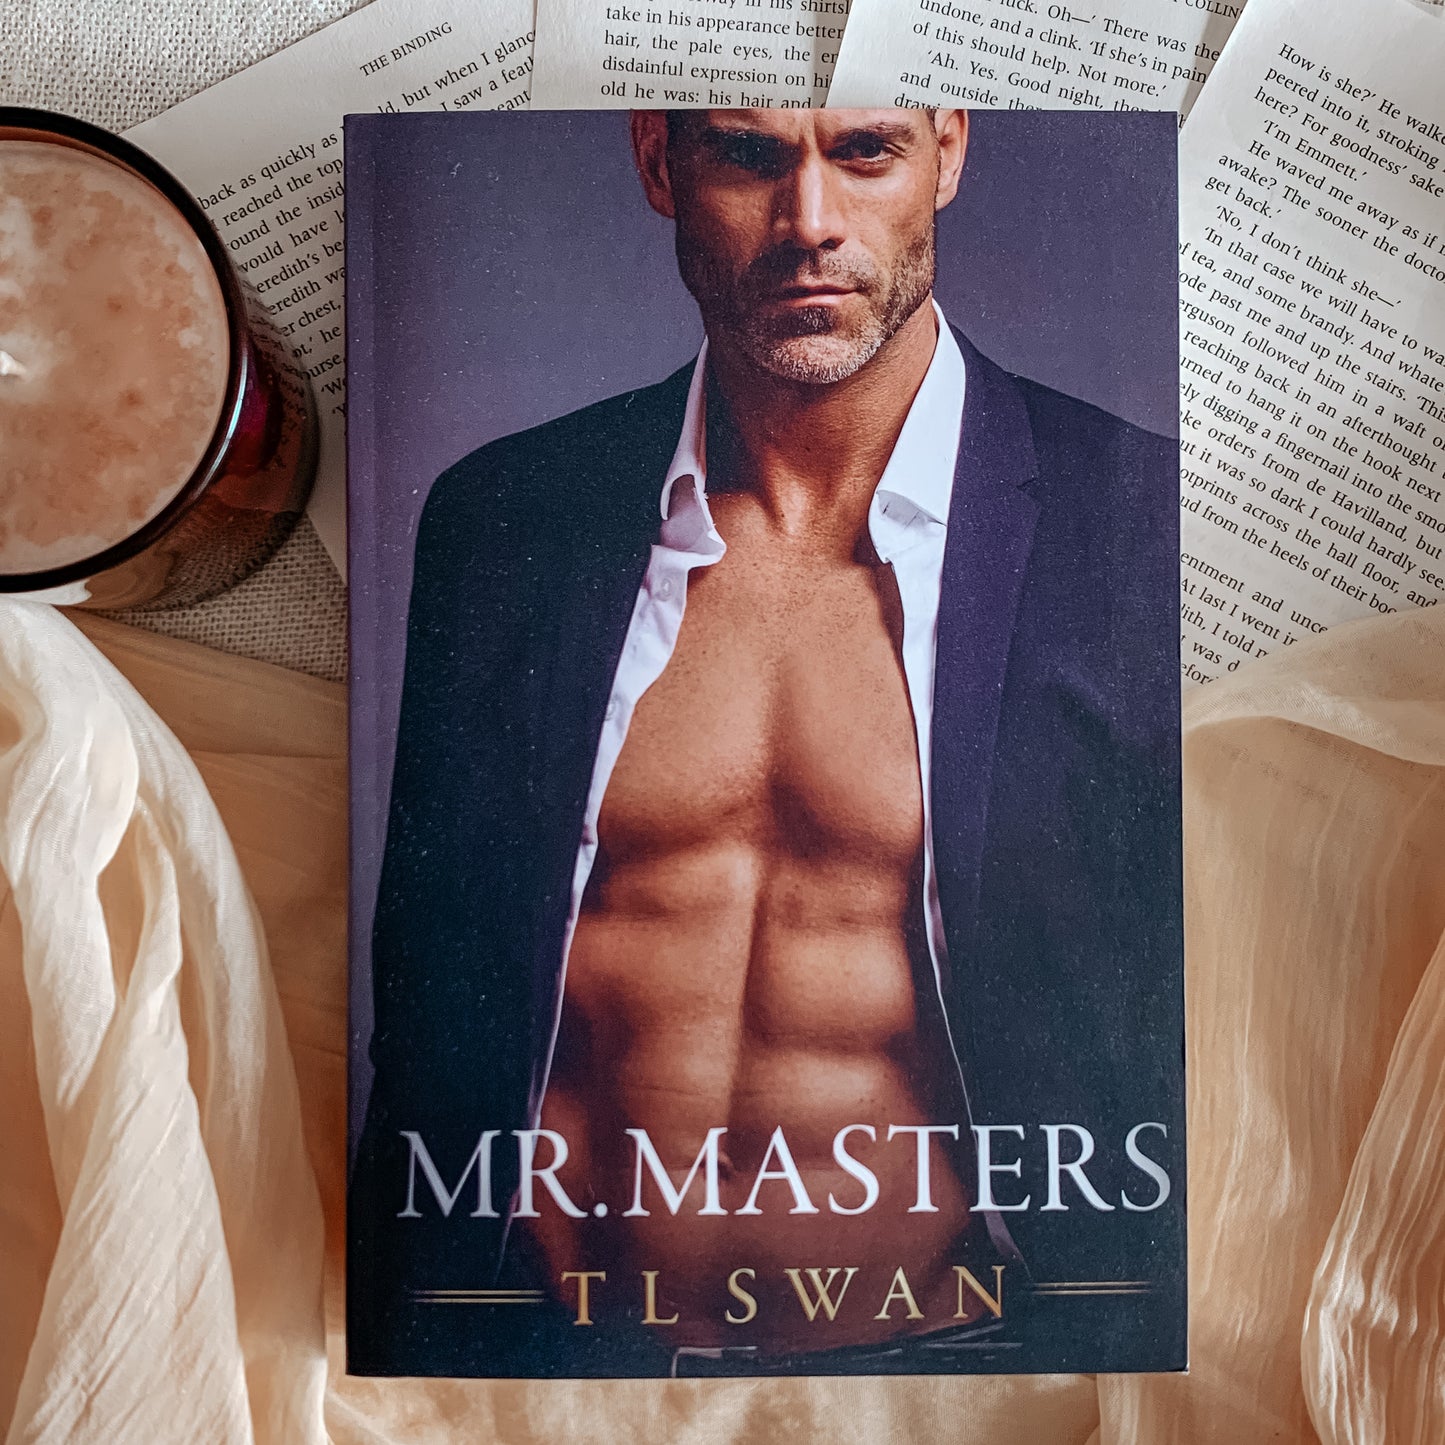 The Mr series by T L Swan